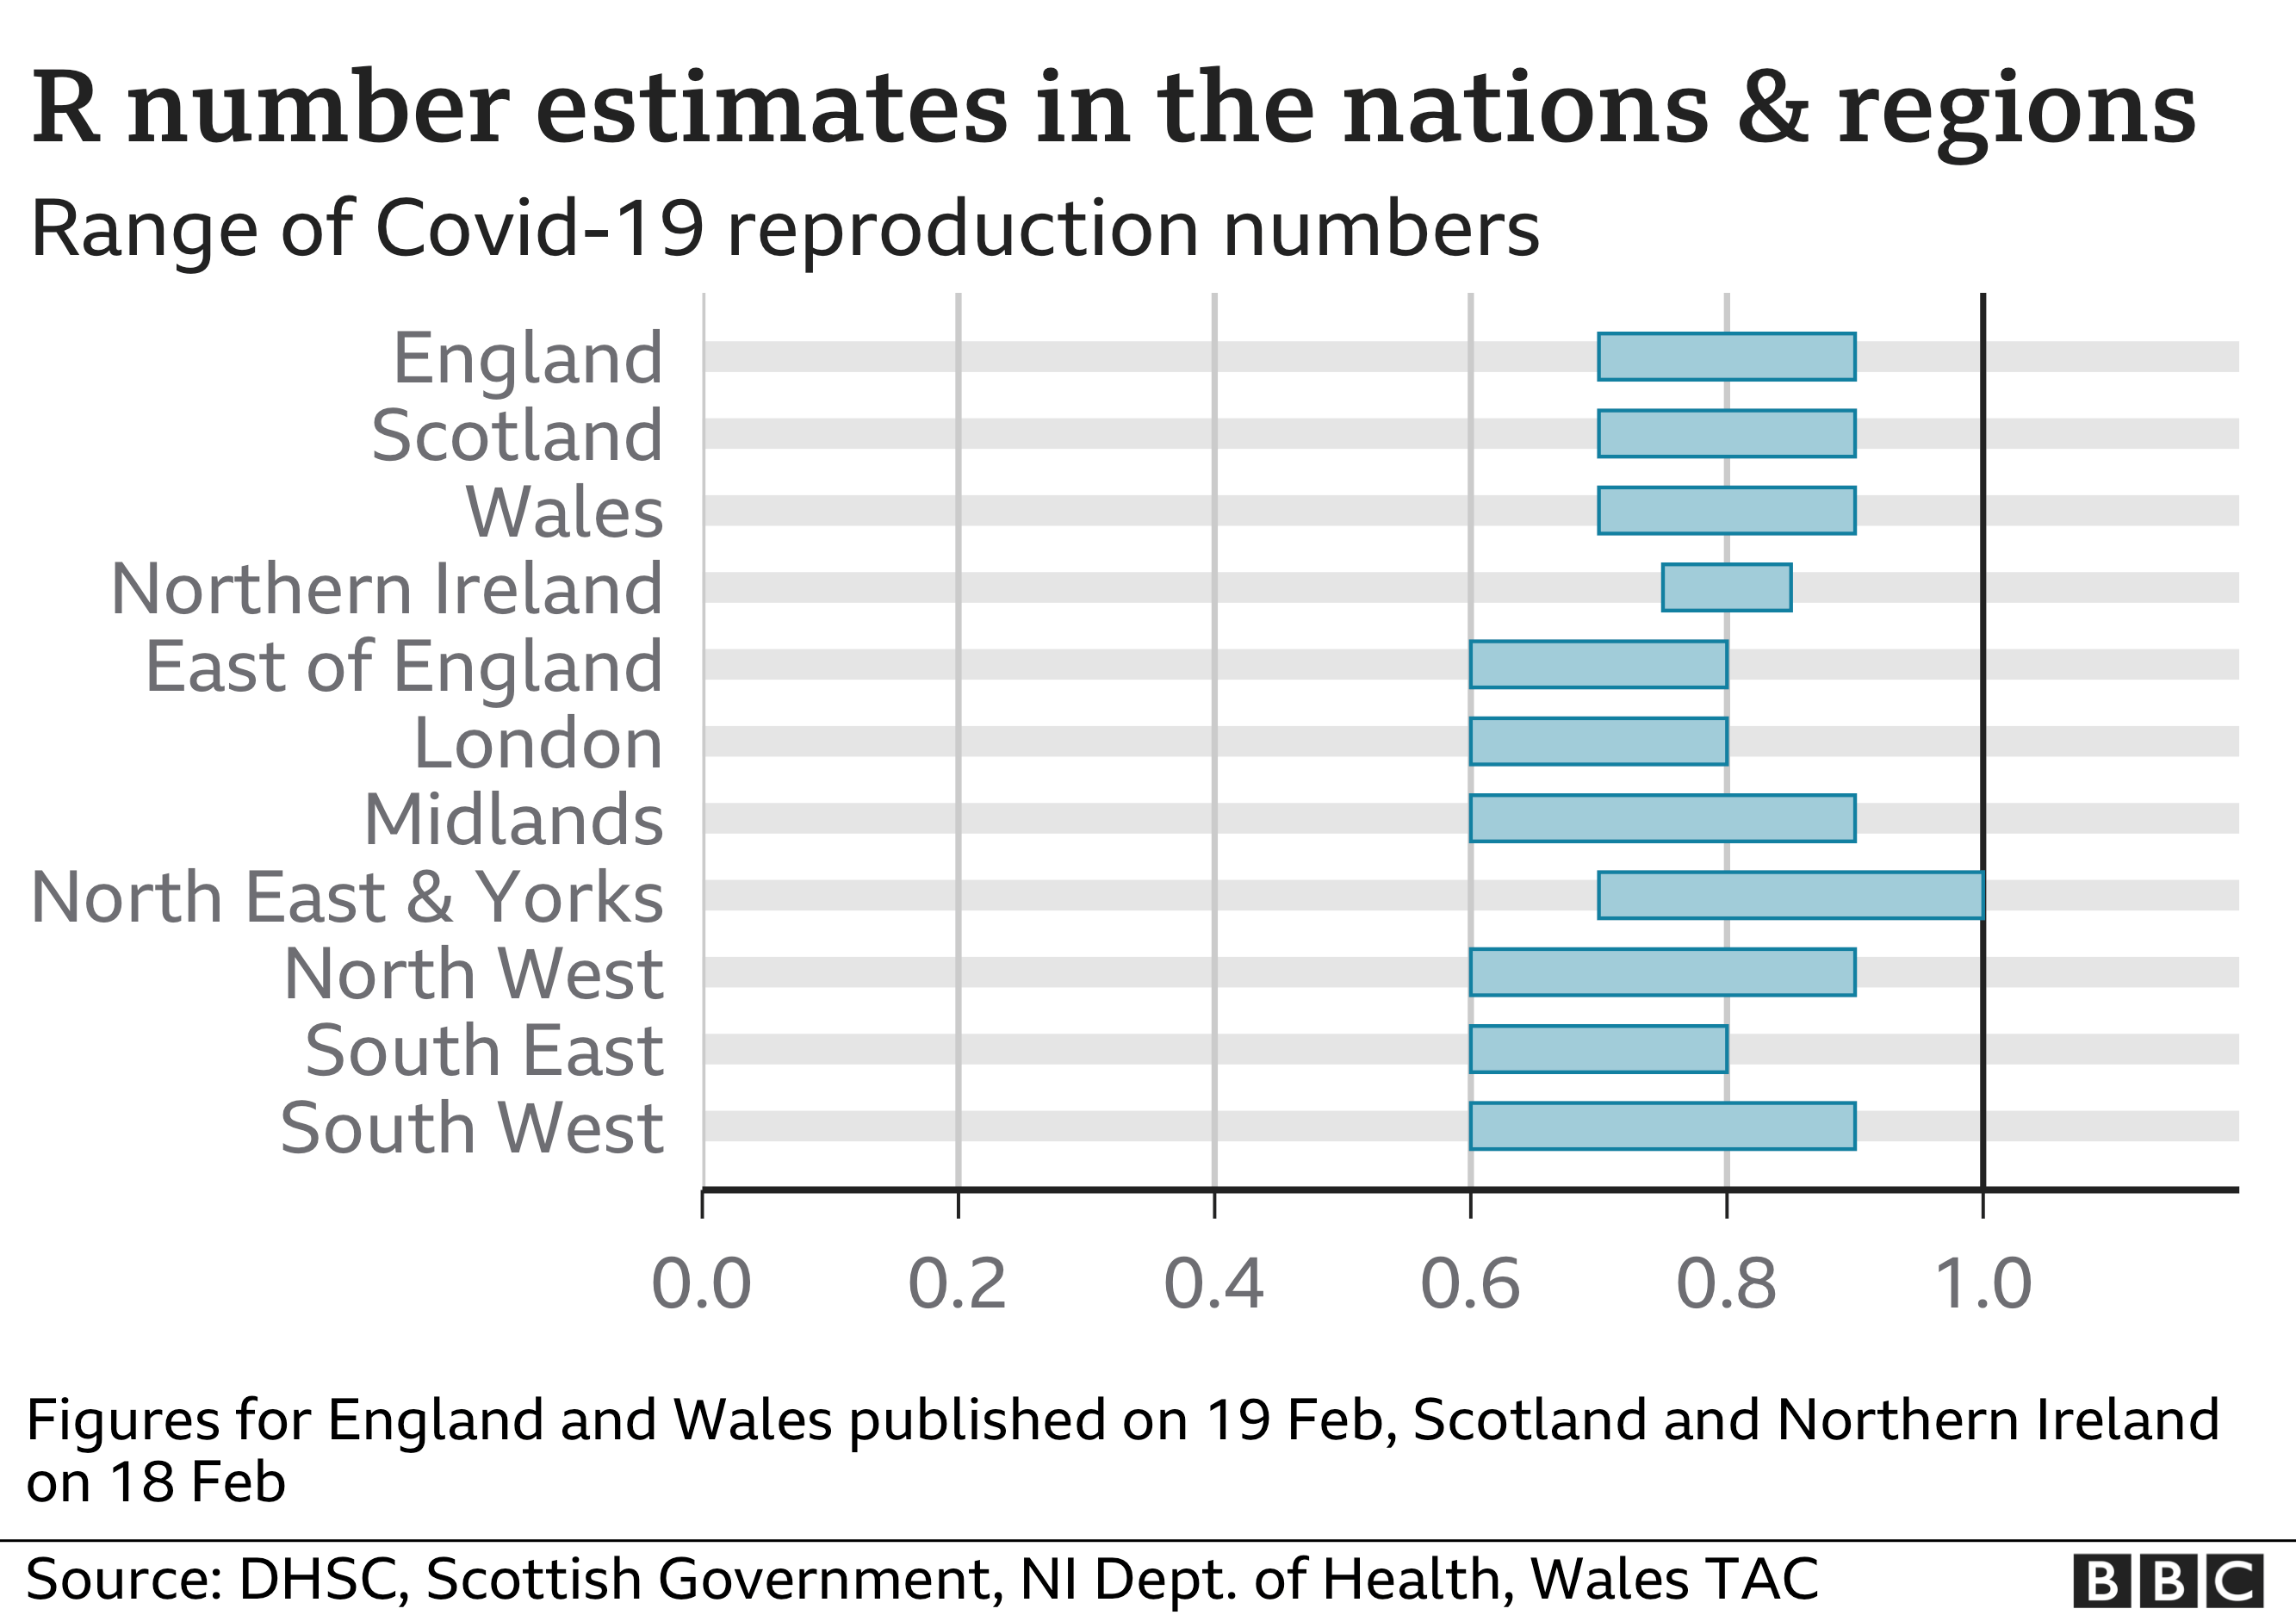 R number estimates in the nations and regions 19 Feb